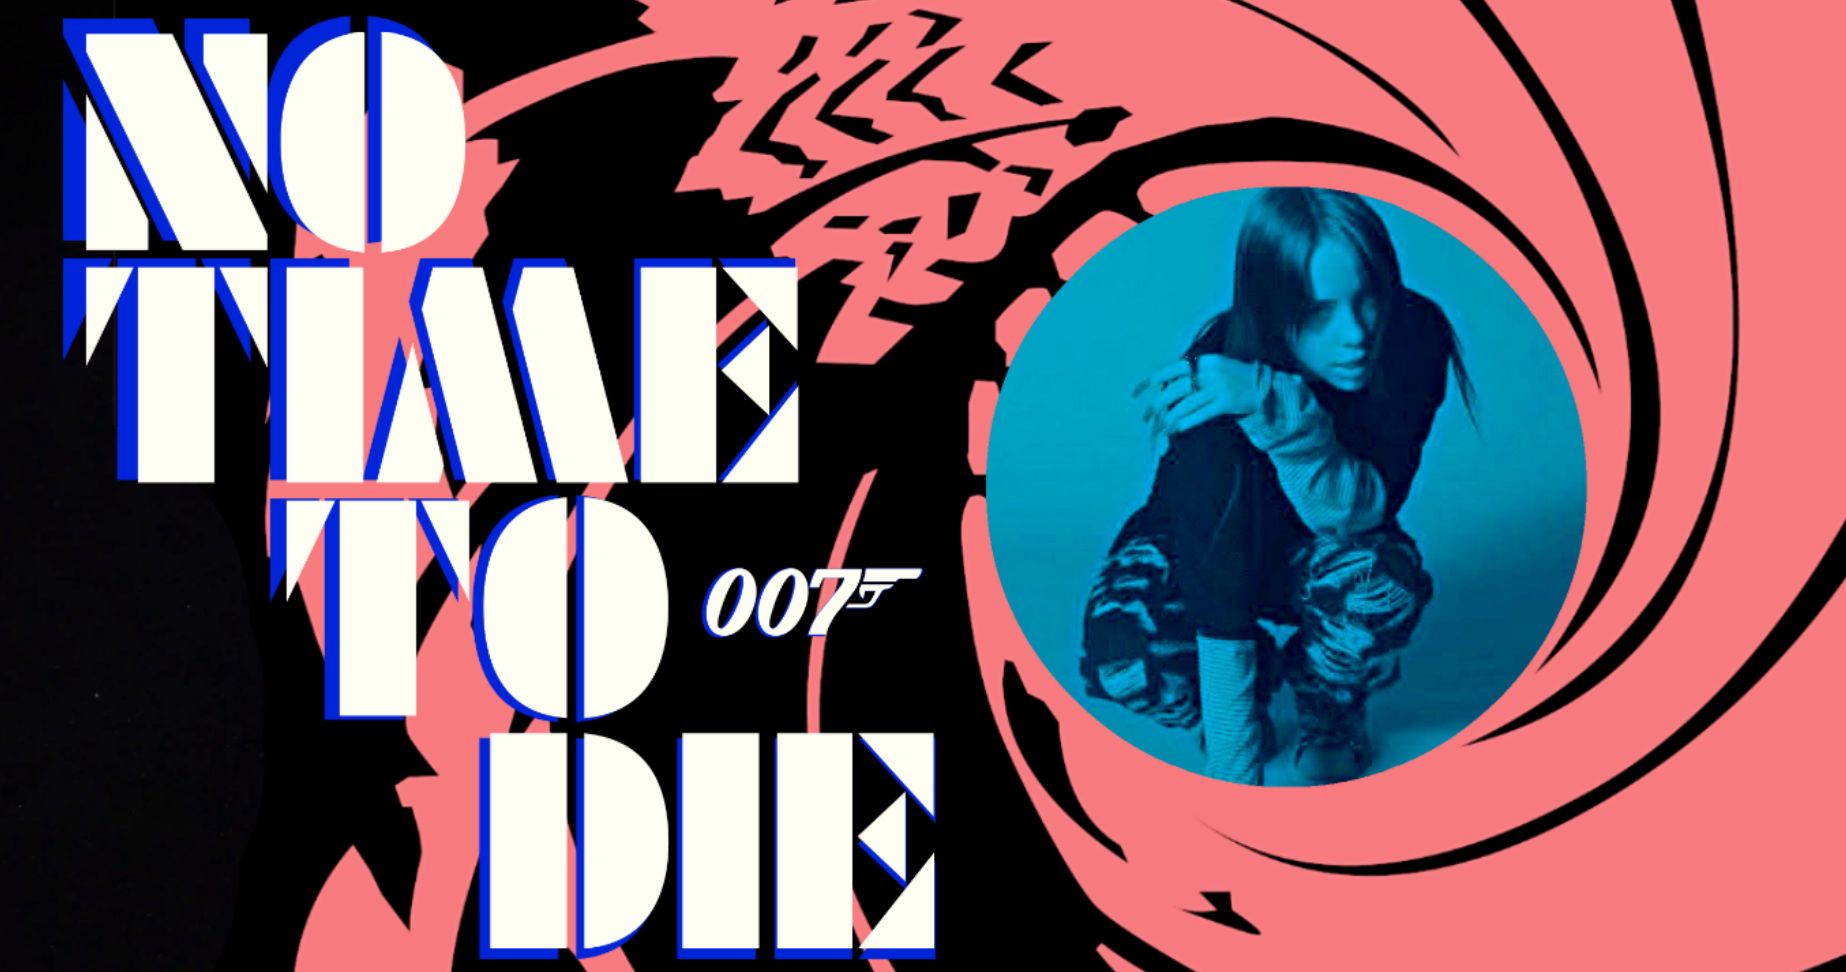 Billie Eilish Teases James Bond 25 Song, Full No Time to Die Theme Drops Tomorrow